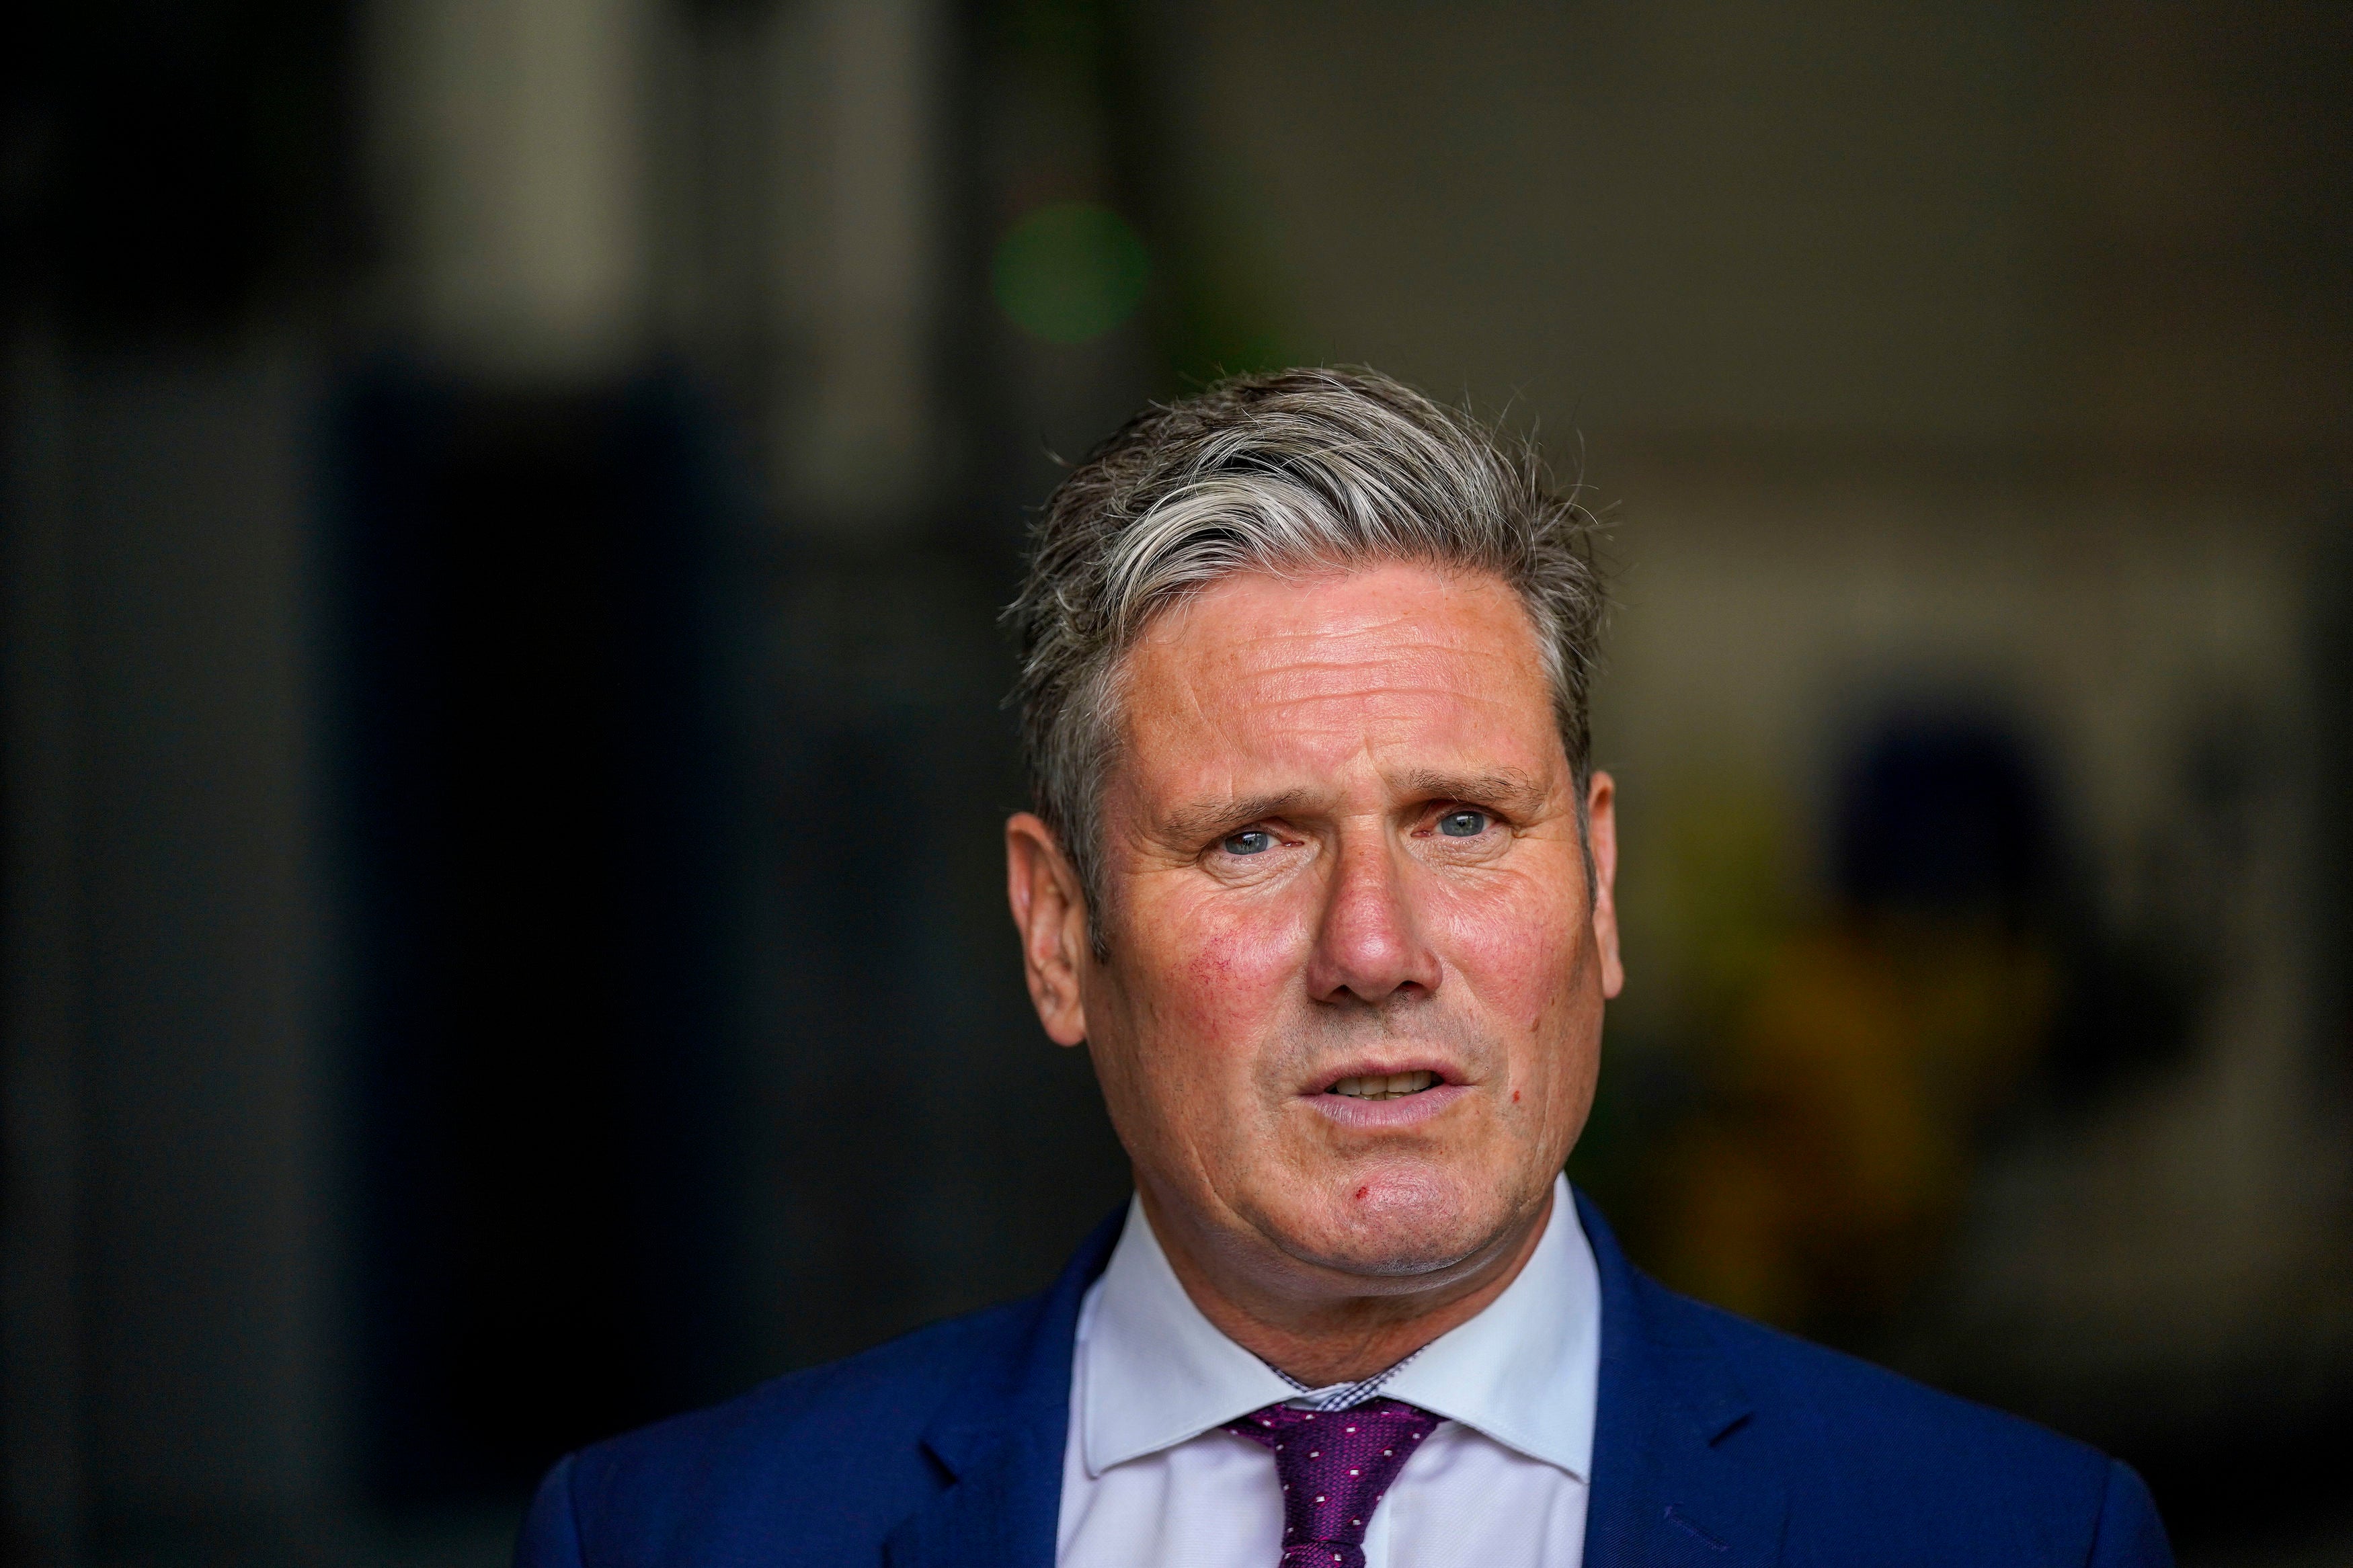 Labour leader Keir Starmer could be in for another electoral drubbing